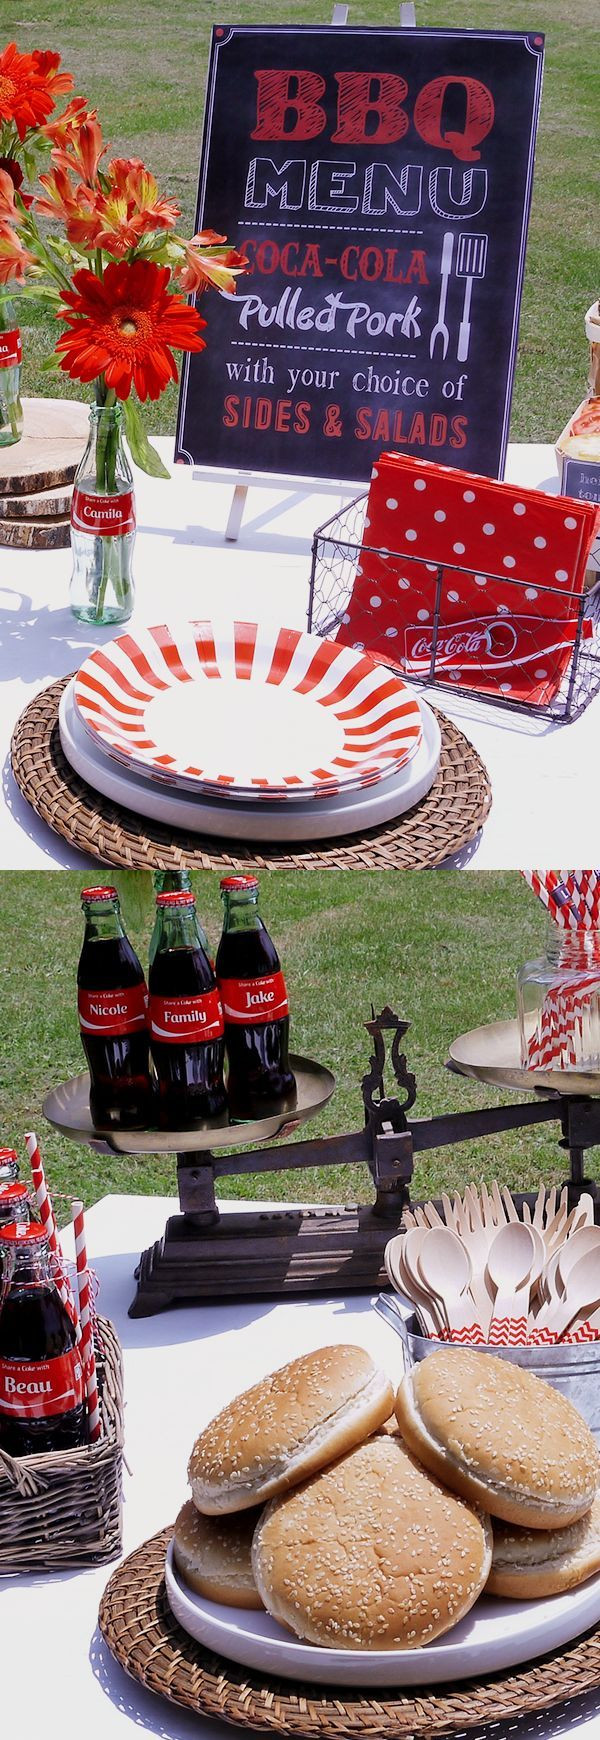 Backyard Cookout Party Ideas
 733 best Birthday Ideas for Adults images on Pinterest